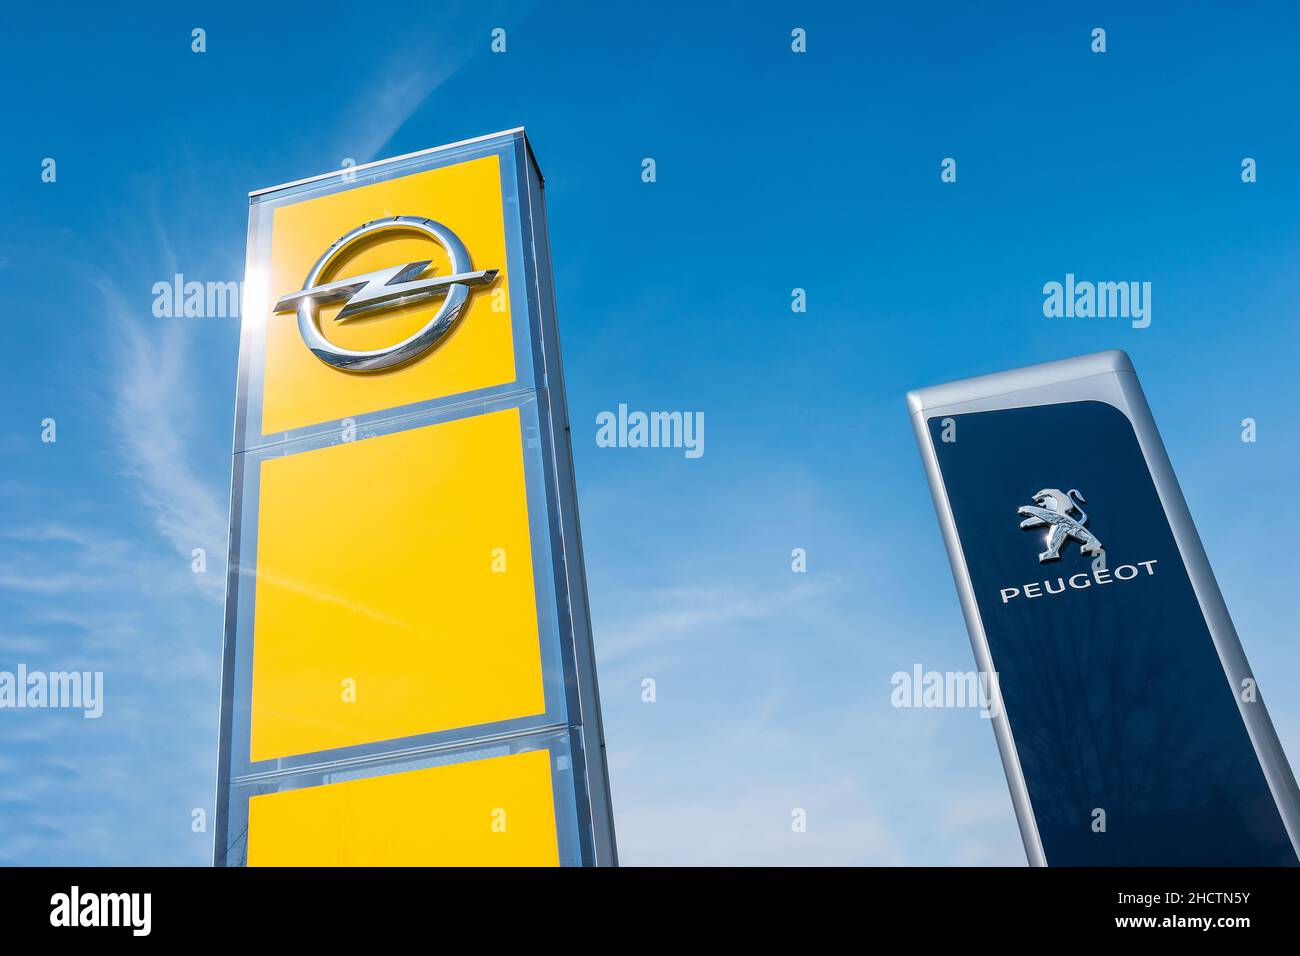 Peugeot and Opel dealership sign against blue sky. Peugeot is a French automobile manufacturer and part of Groupe PSA. Opel AG is a German automobile Stock Photo